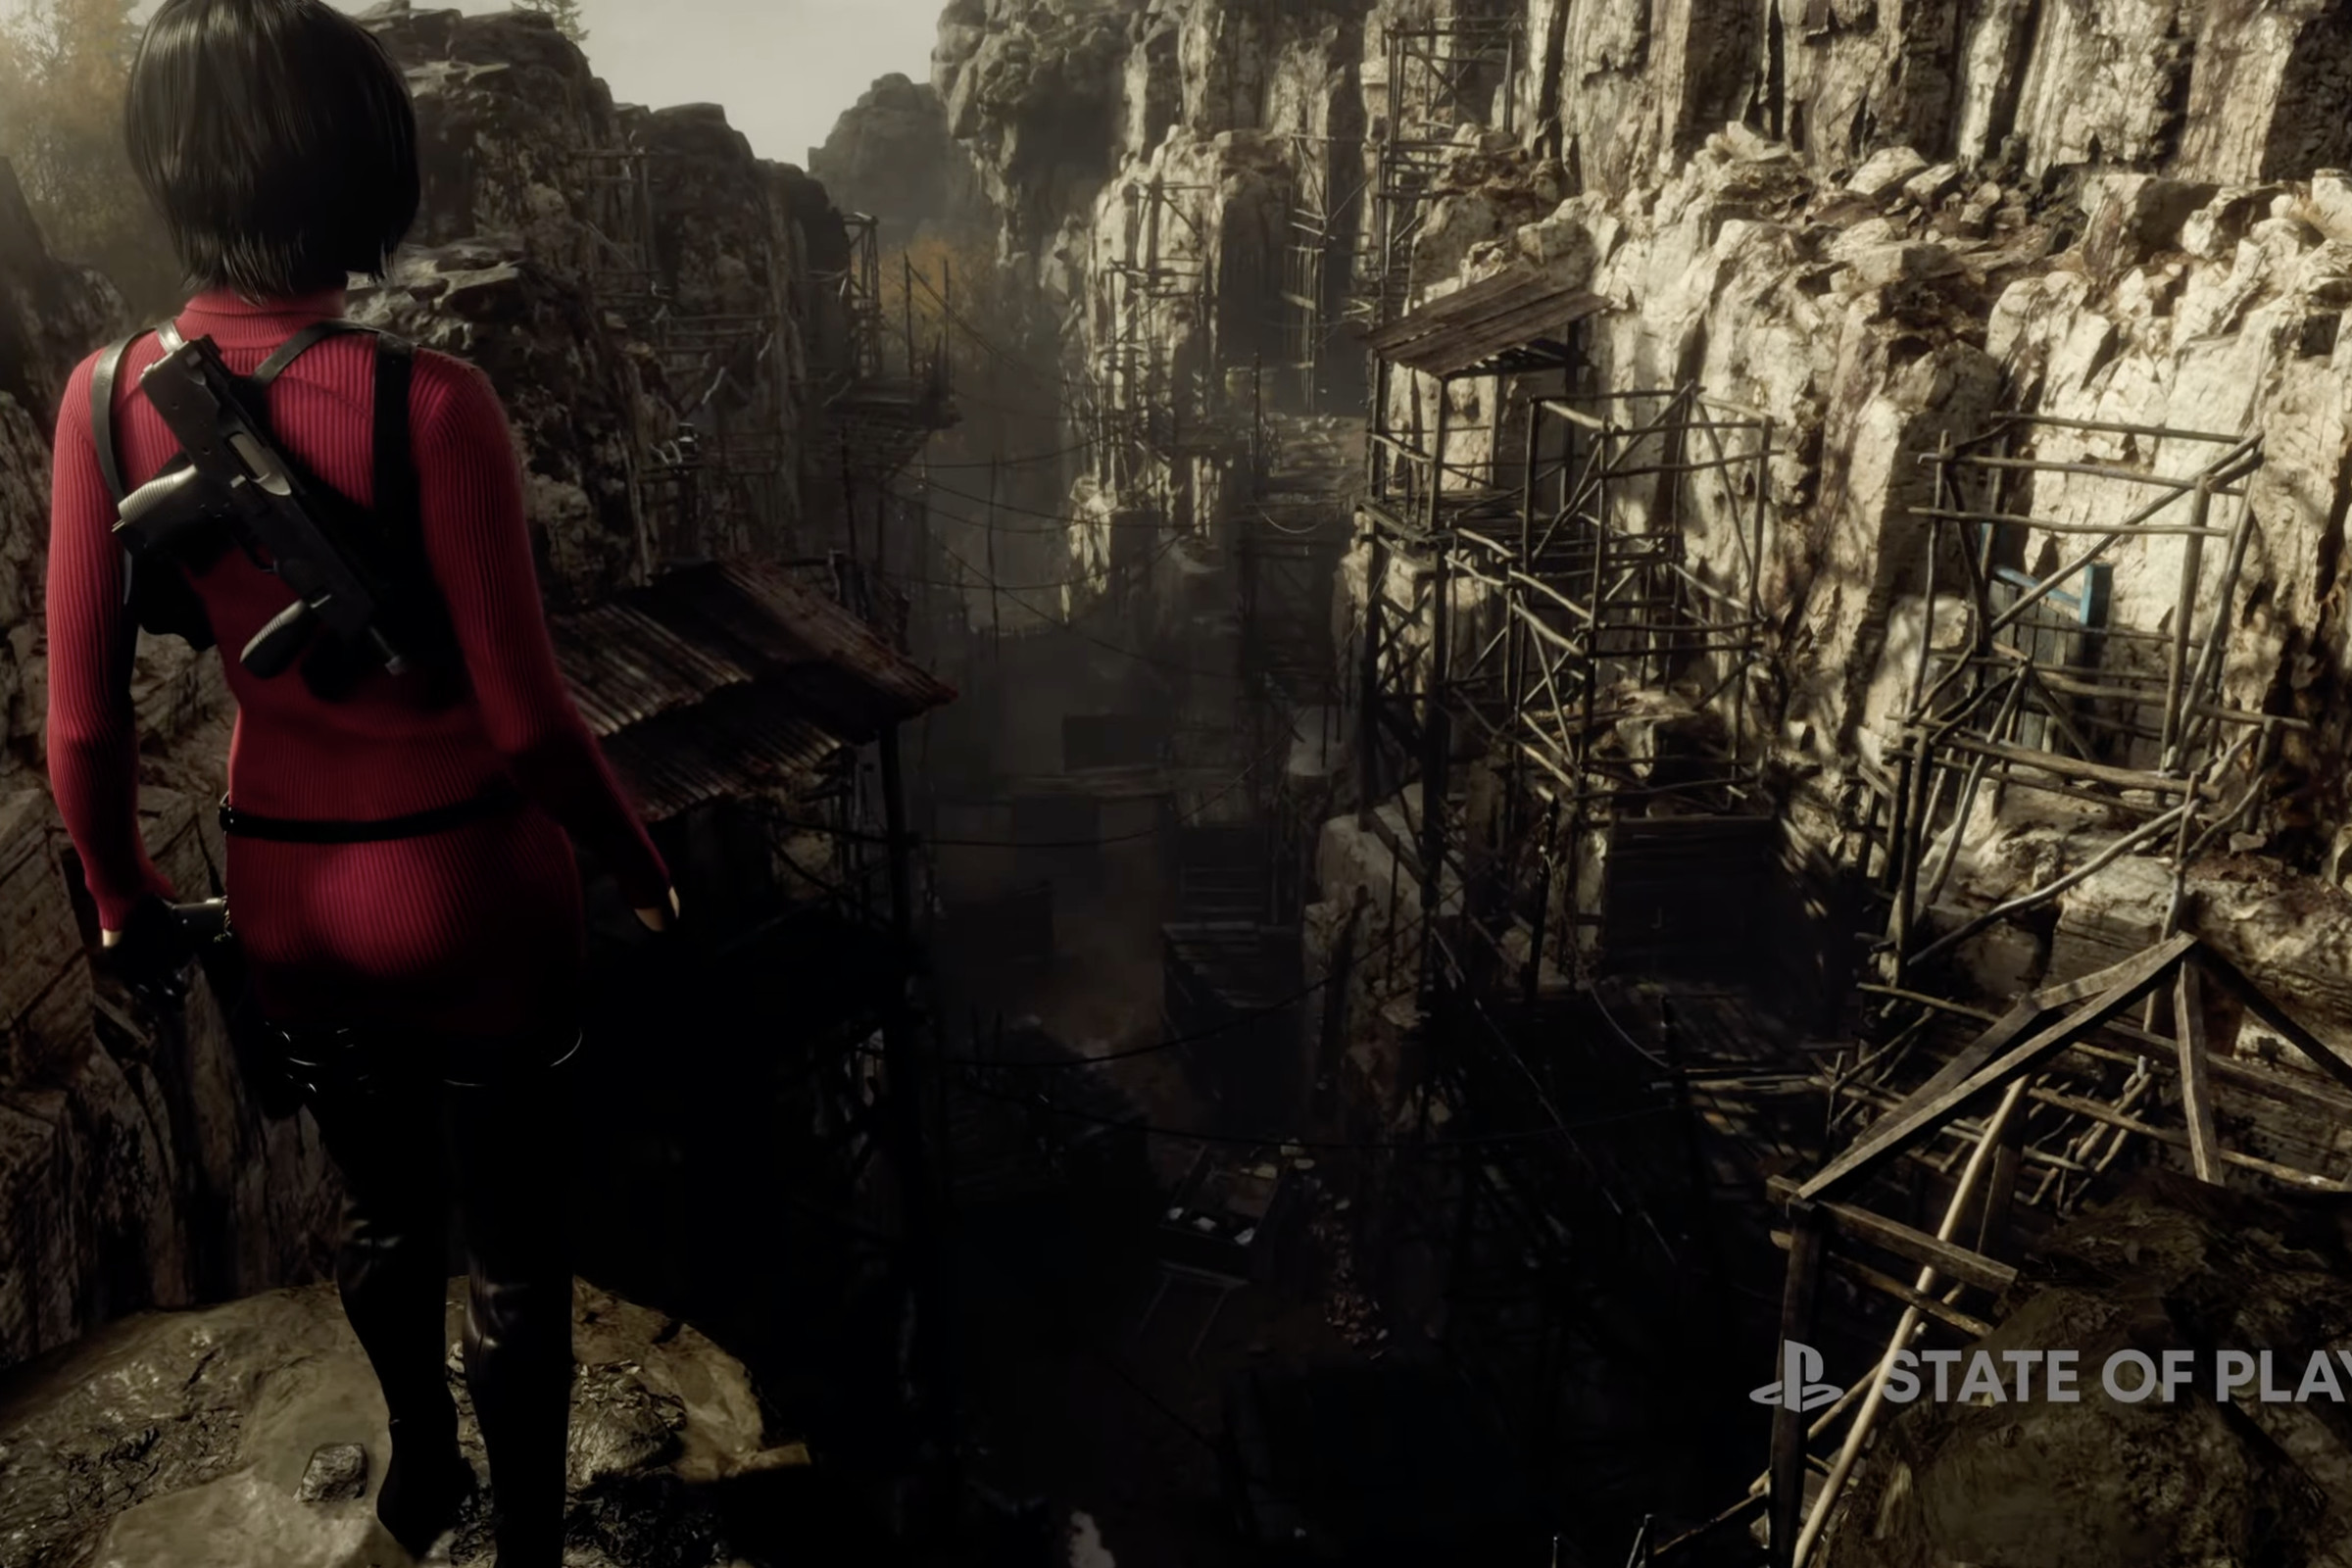 A screenshot from Resident Evil 4’s Separate Ways DLC, showing Ada Wong standing over a cliff.